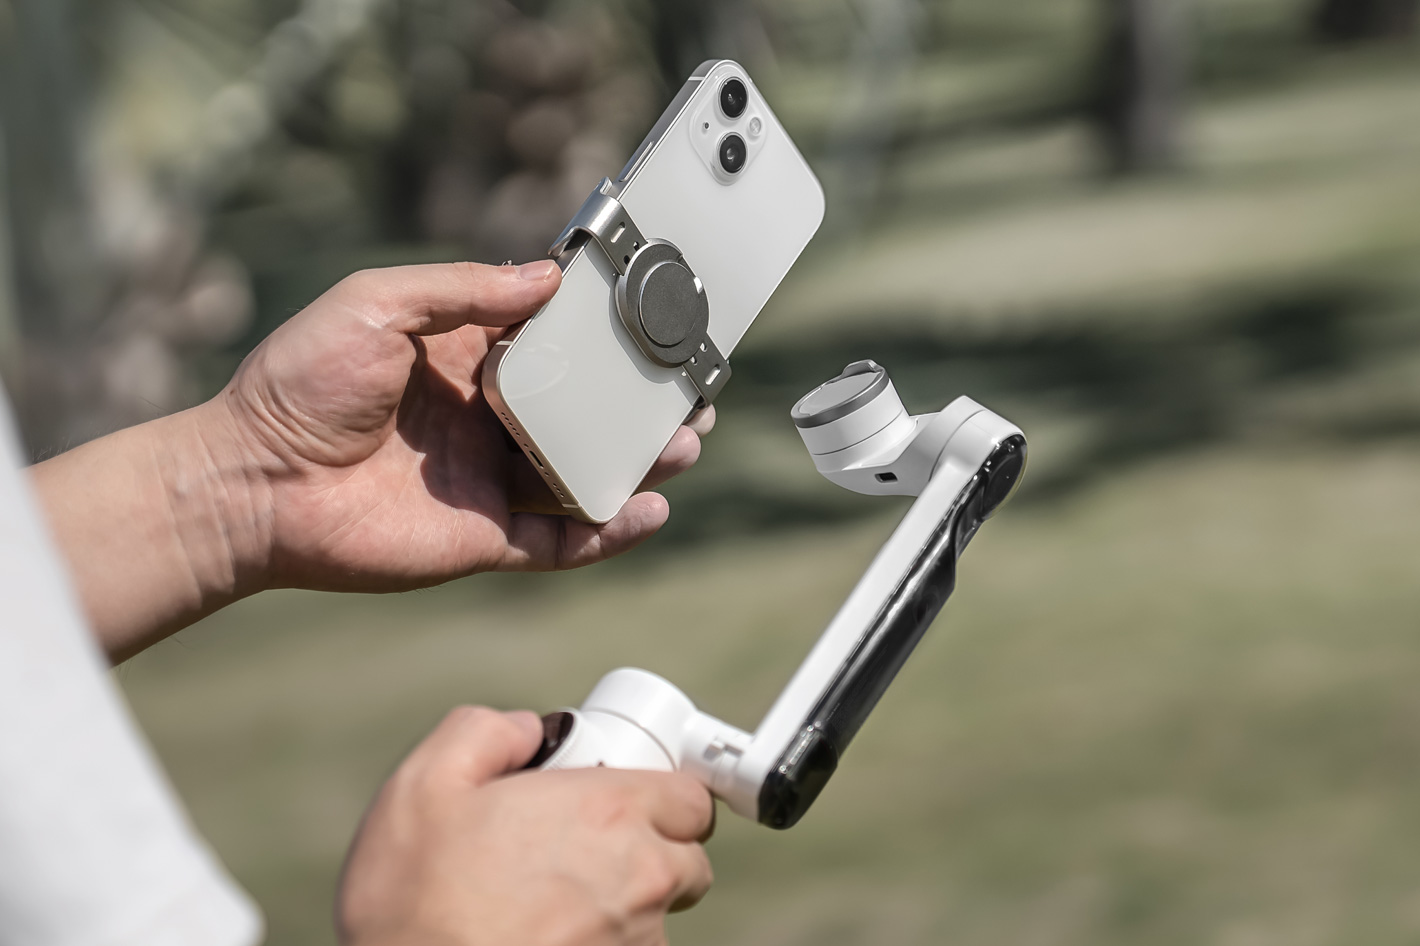 Insta360 Flow: a selfie stick, tripod and power bank for smartphones by  Jose Antunes - ProVideo Coalition